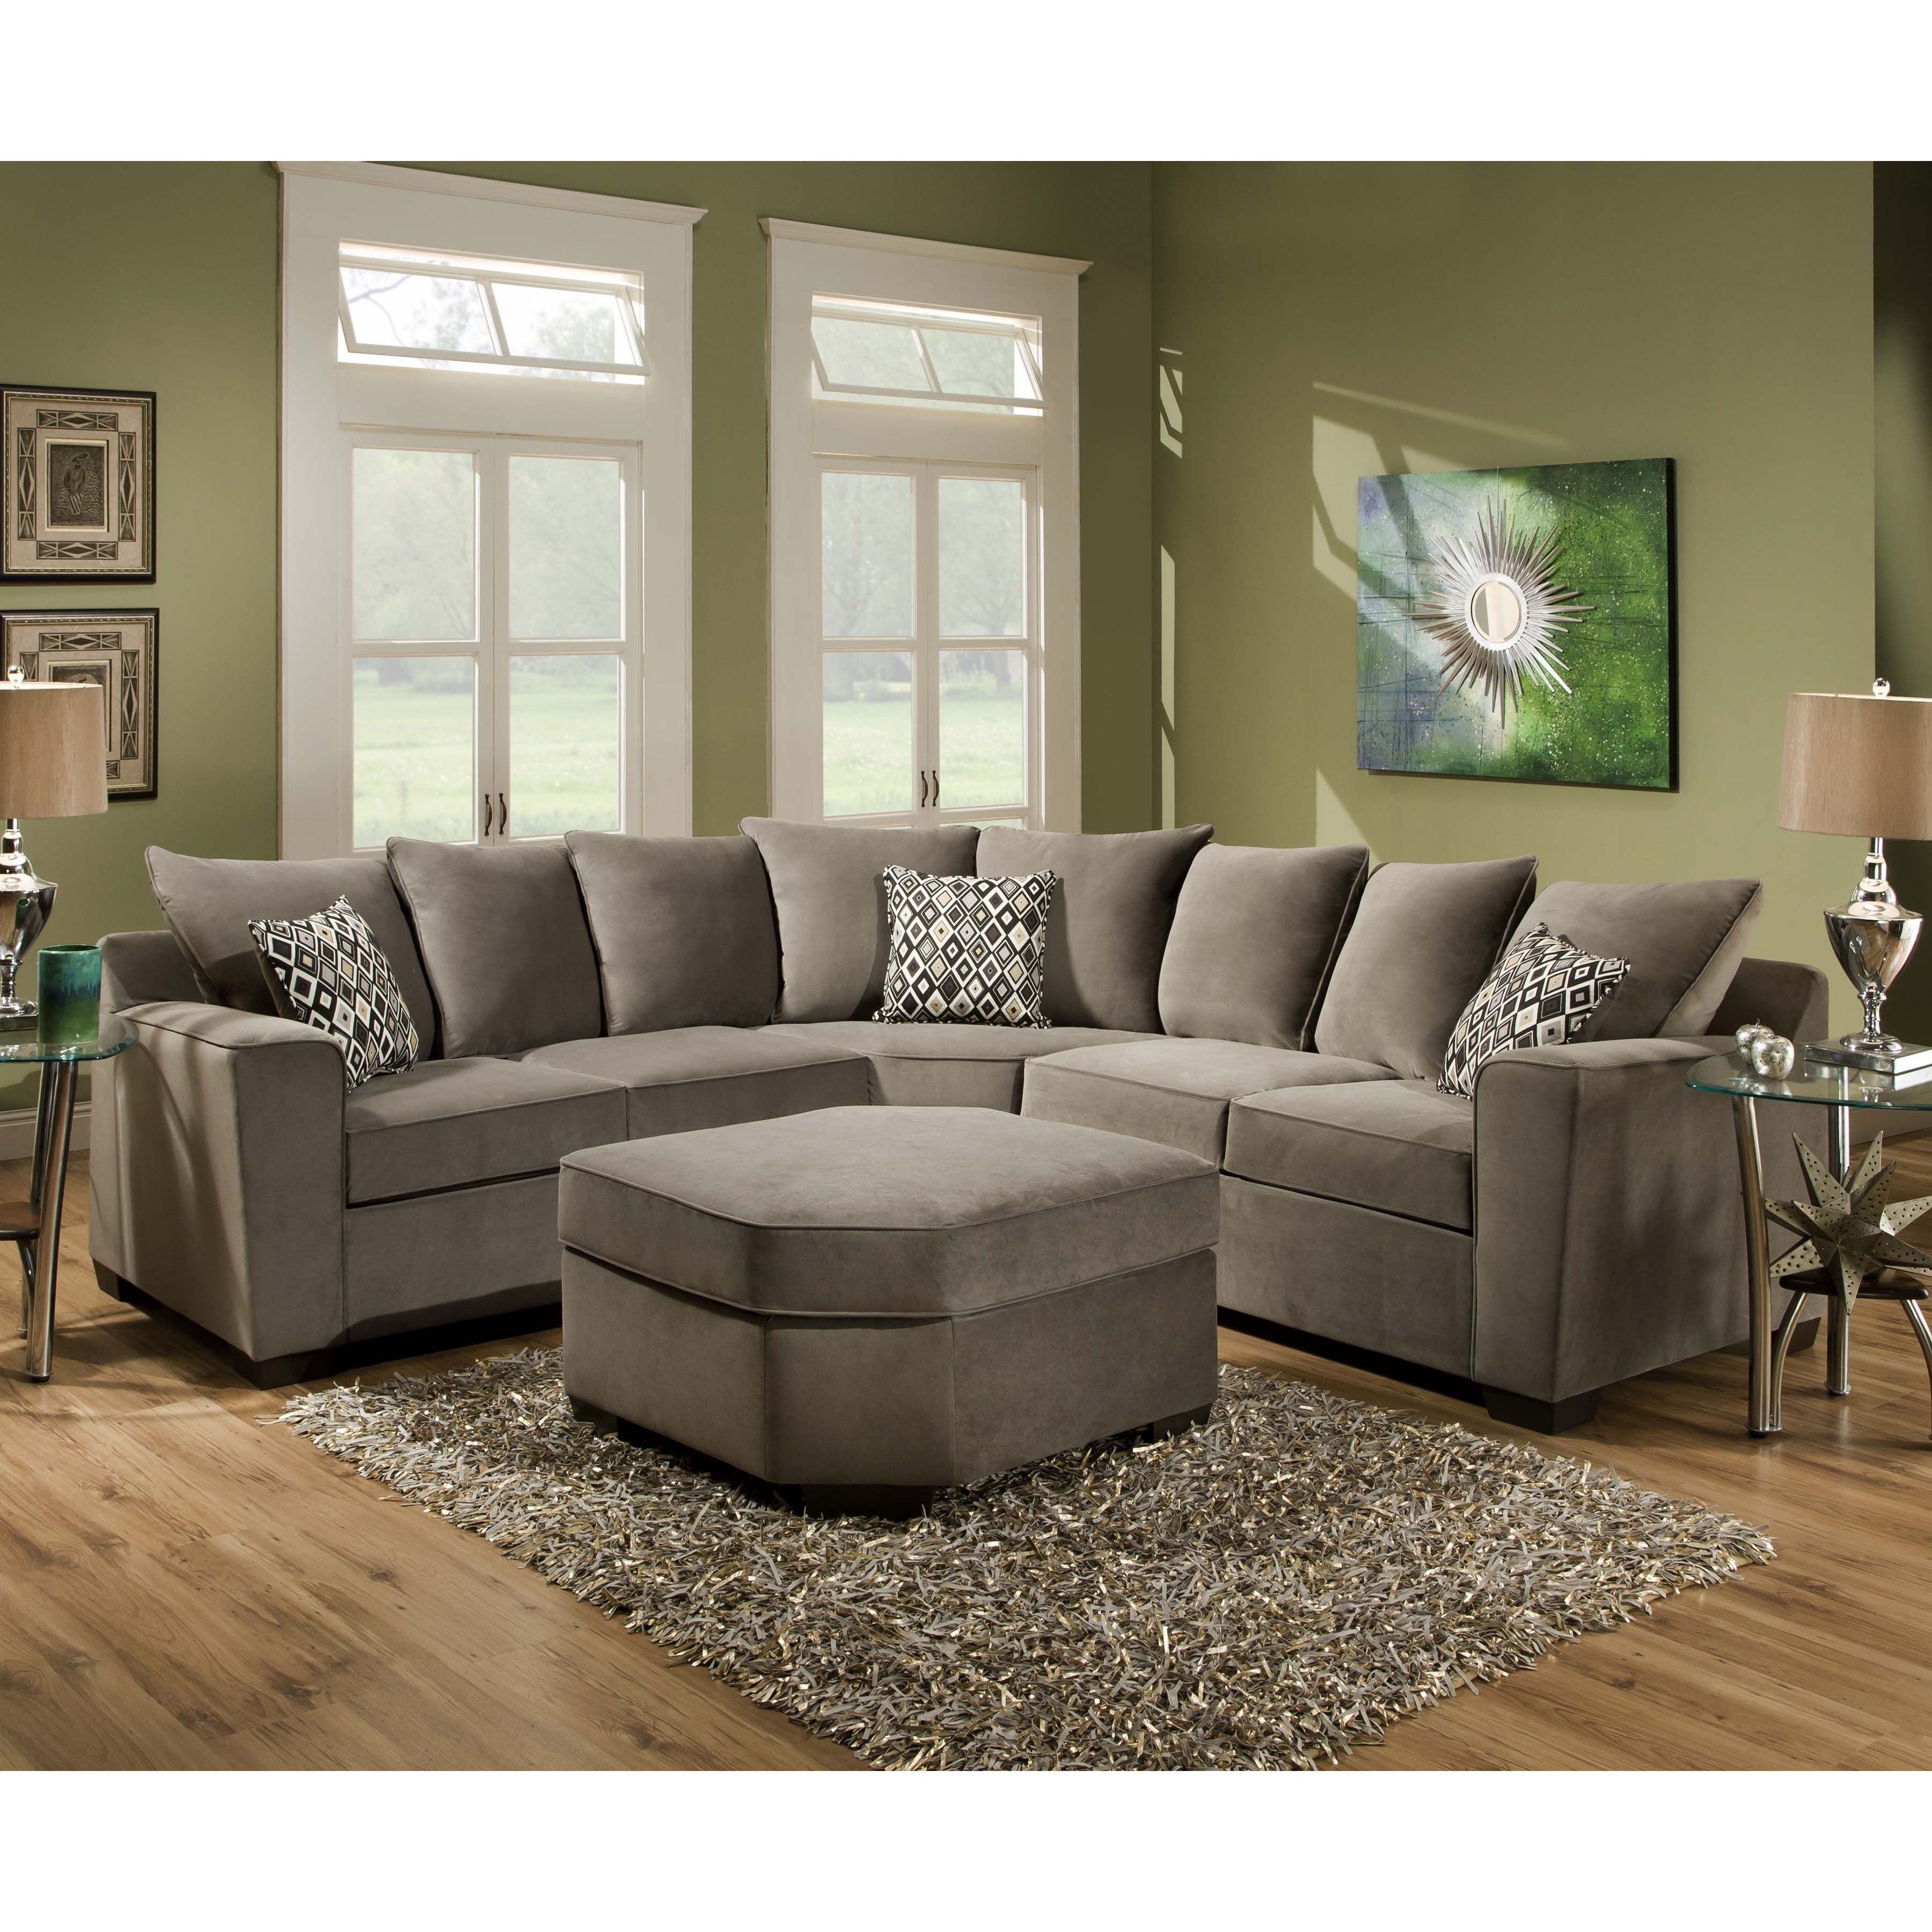 Sectional Sofas At Sears For Most Recently Released Living Room: Sectional Sofas Sears Design With Sectional Couches (View 7 of 20)